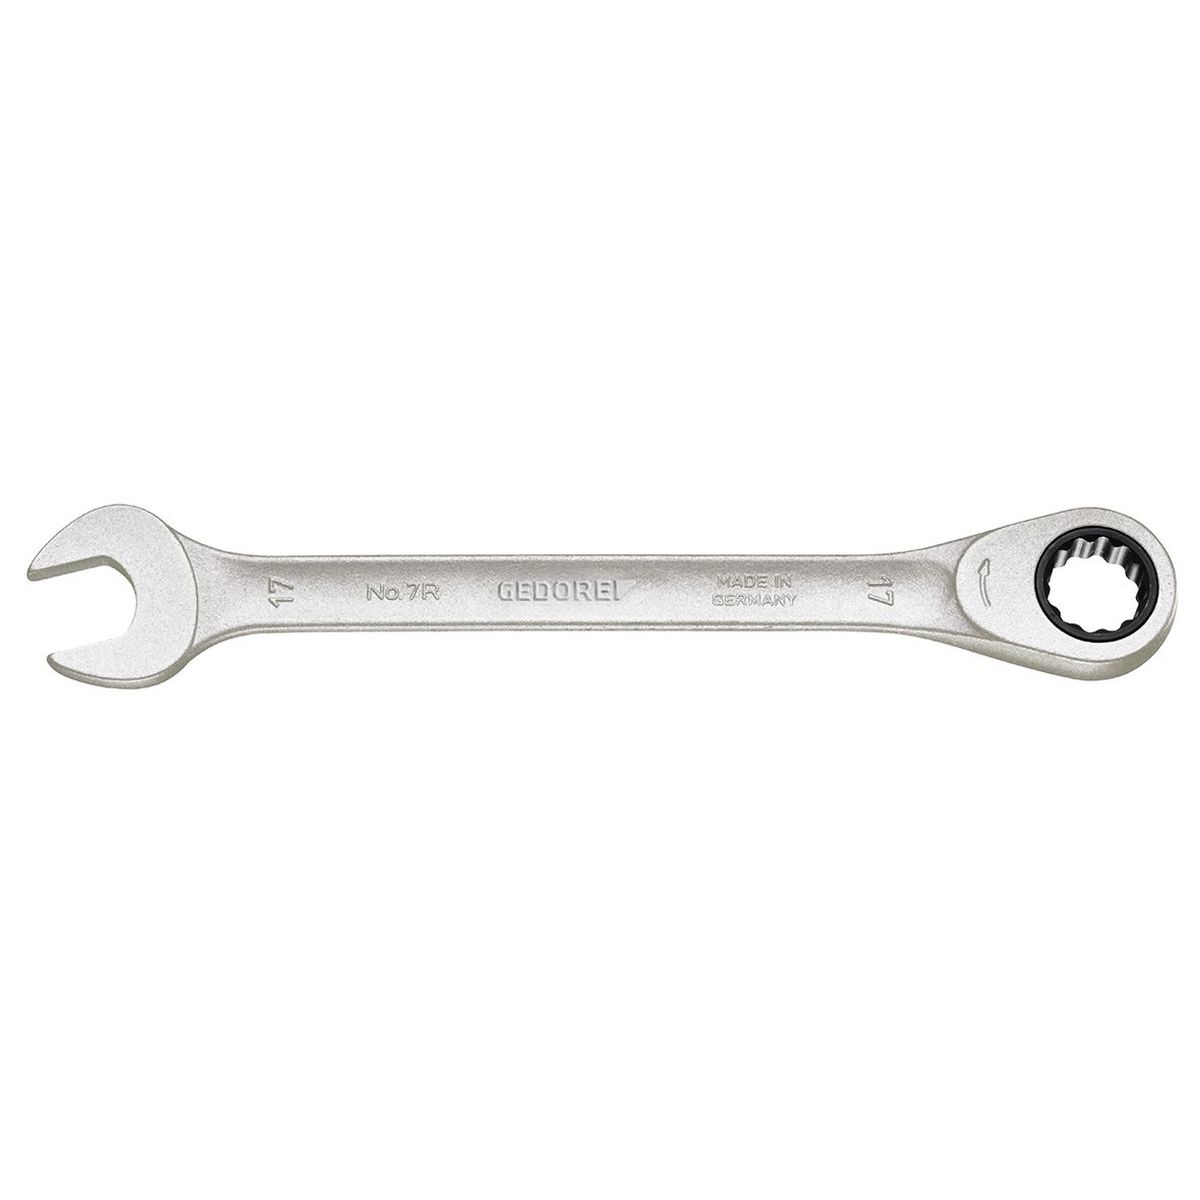 Combination ratchet spanner 10 mm 7 R 10 Gedore